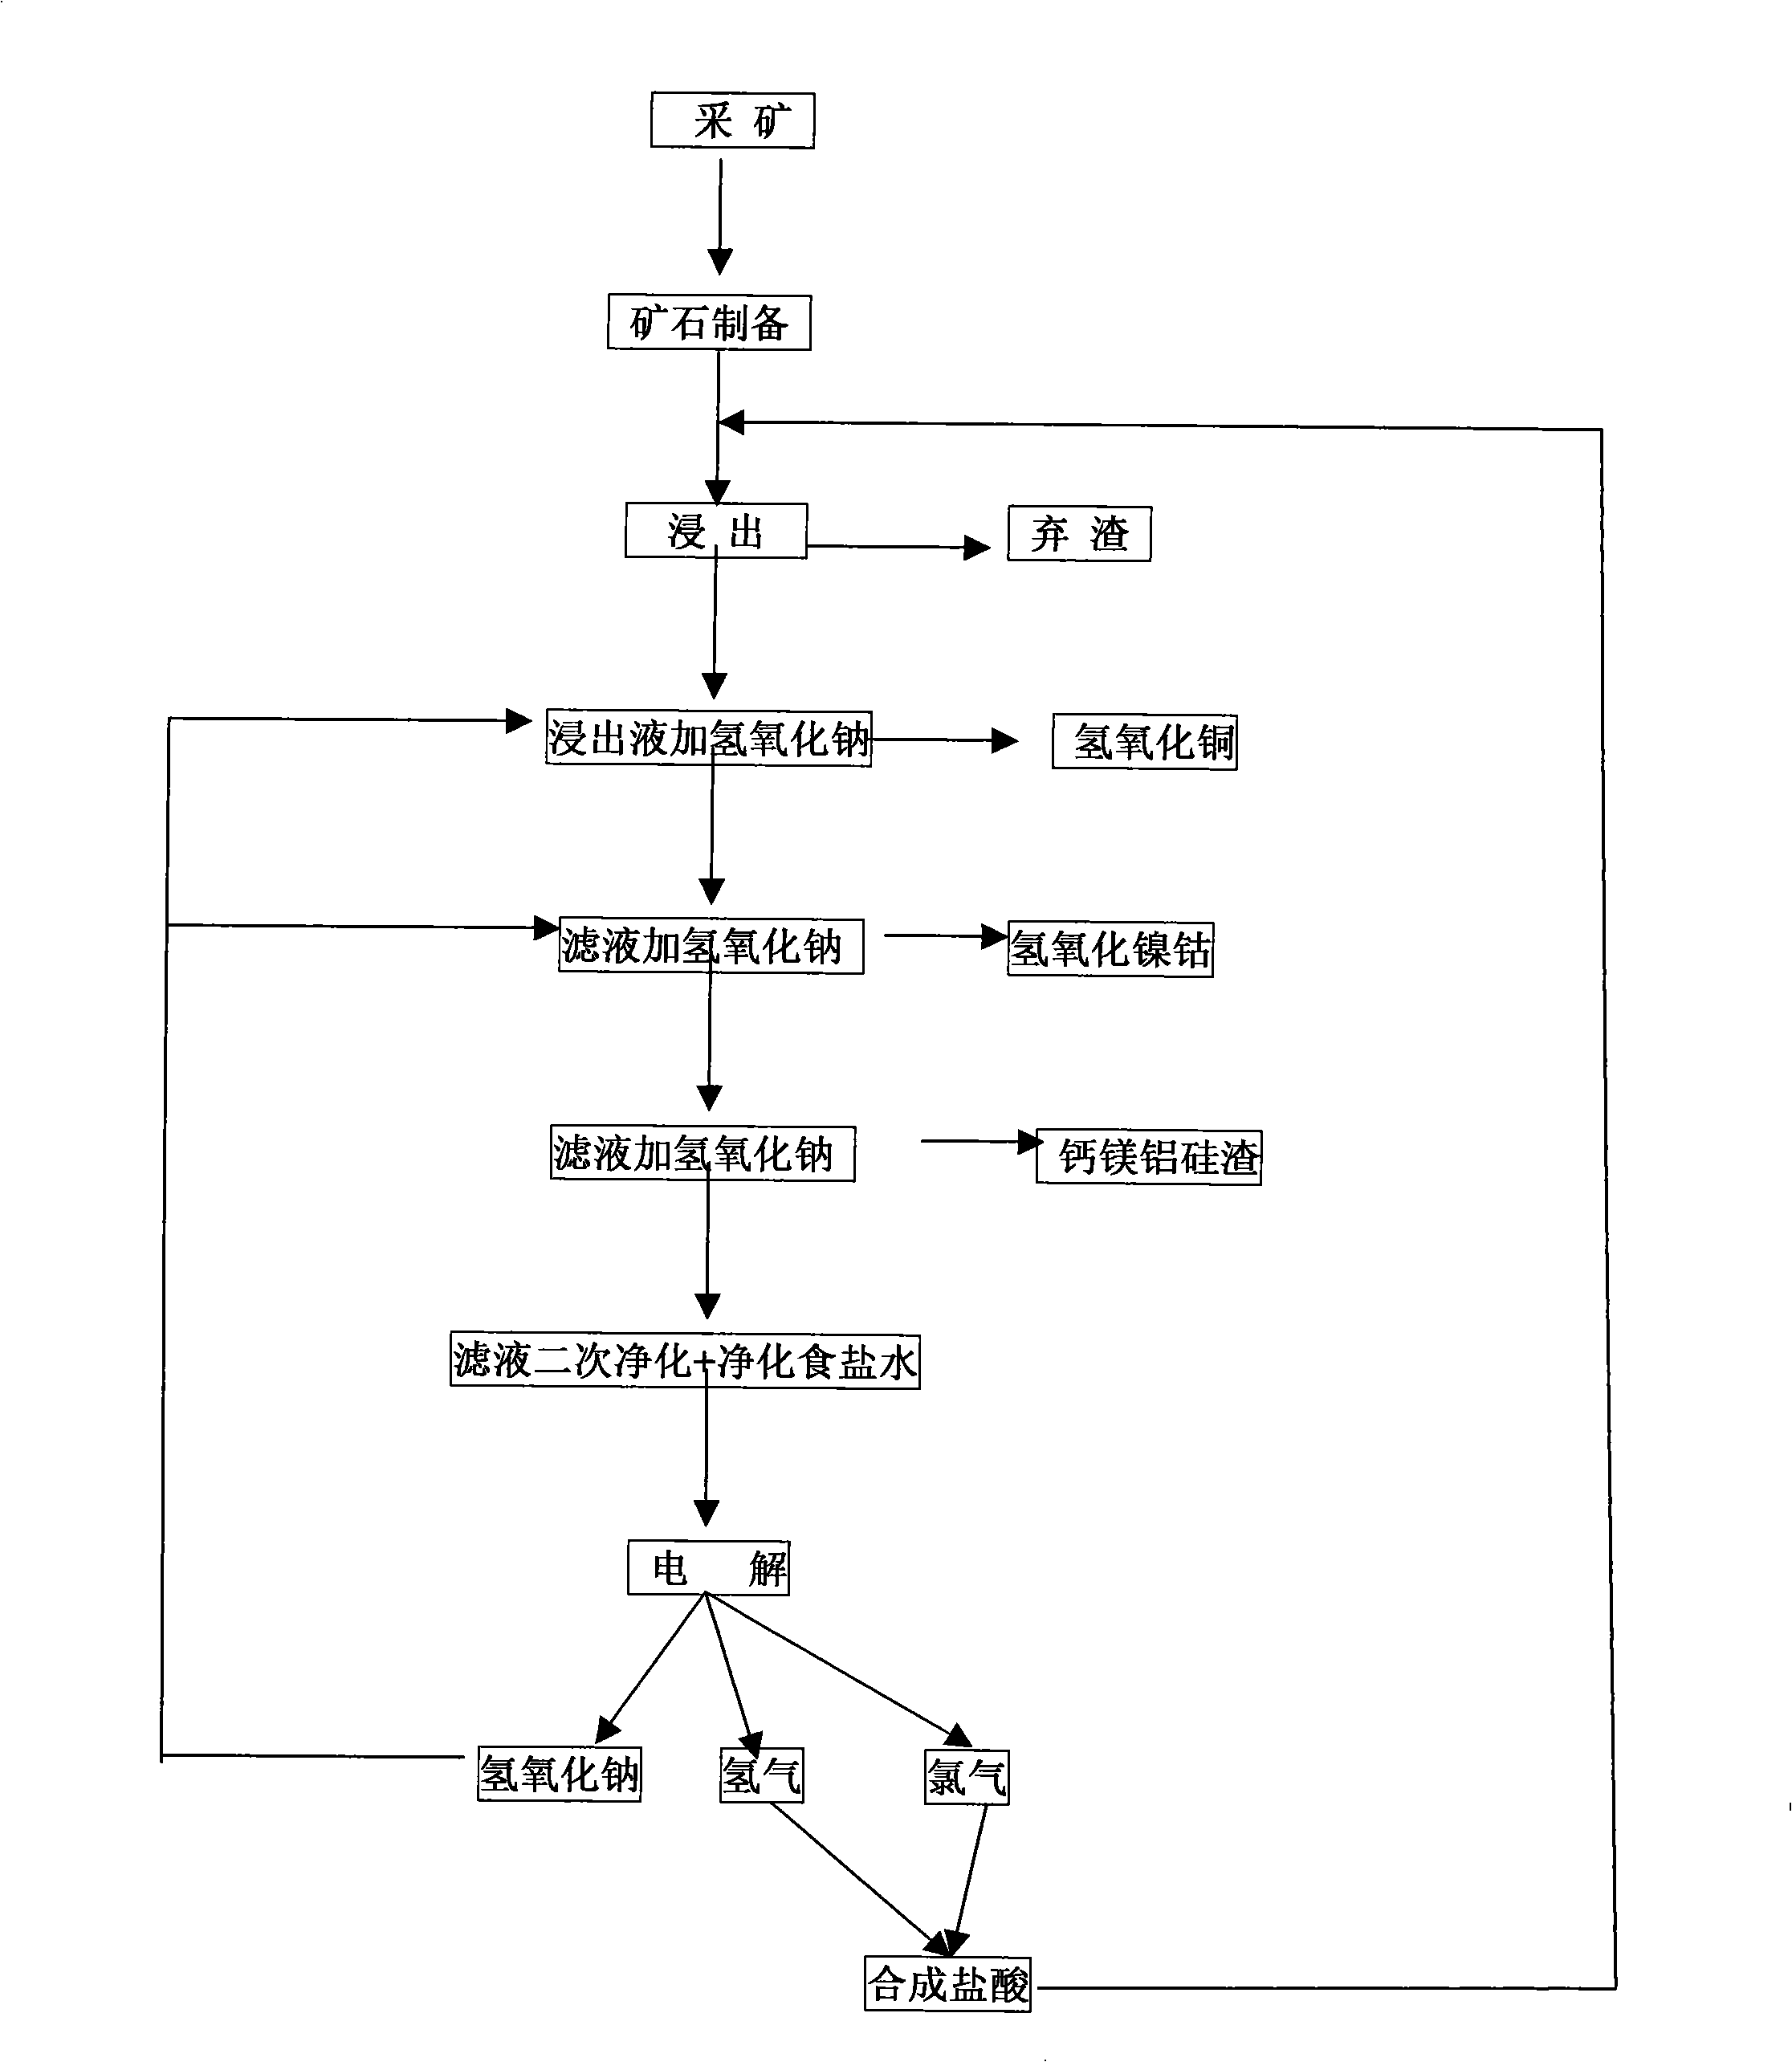 Method for extracting copper, cobalt and nickel from cupric oxide cobalt ore